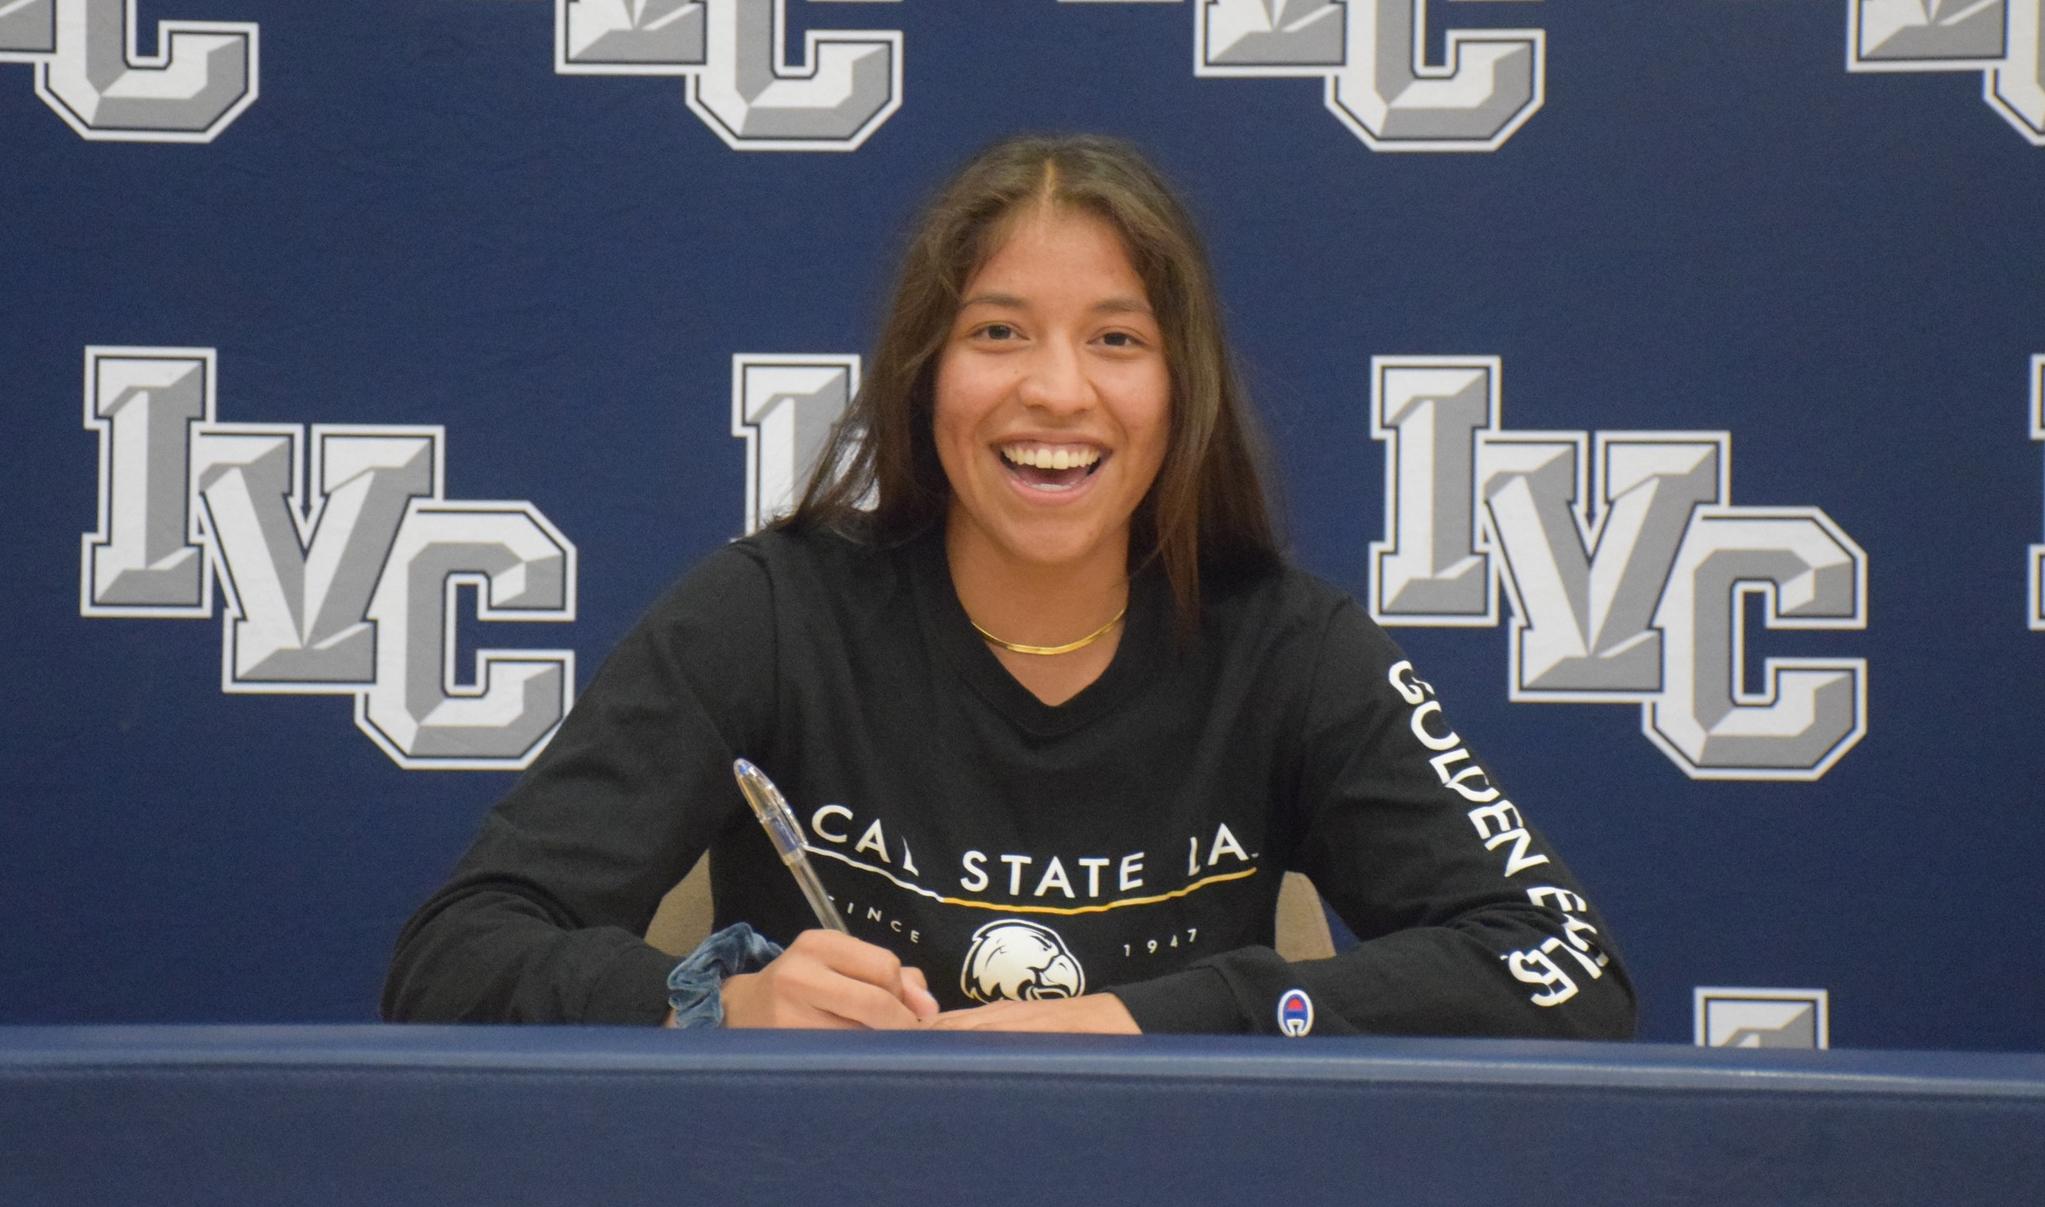 Women's basketball player Paola Roa signs with Cal State LA